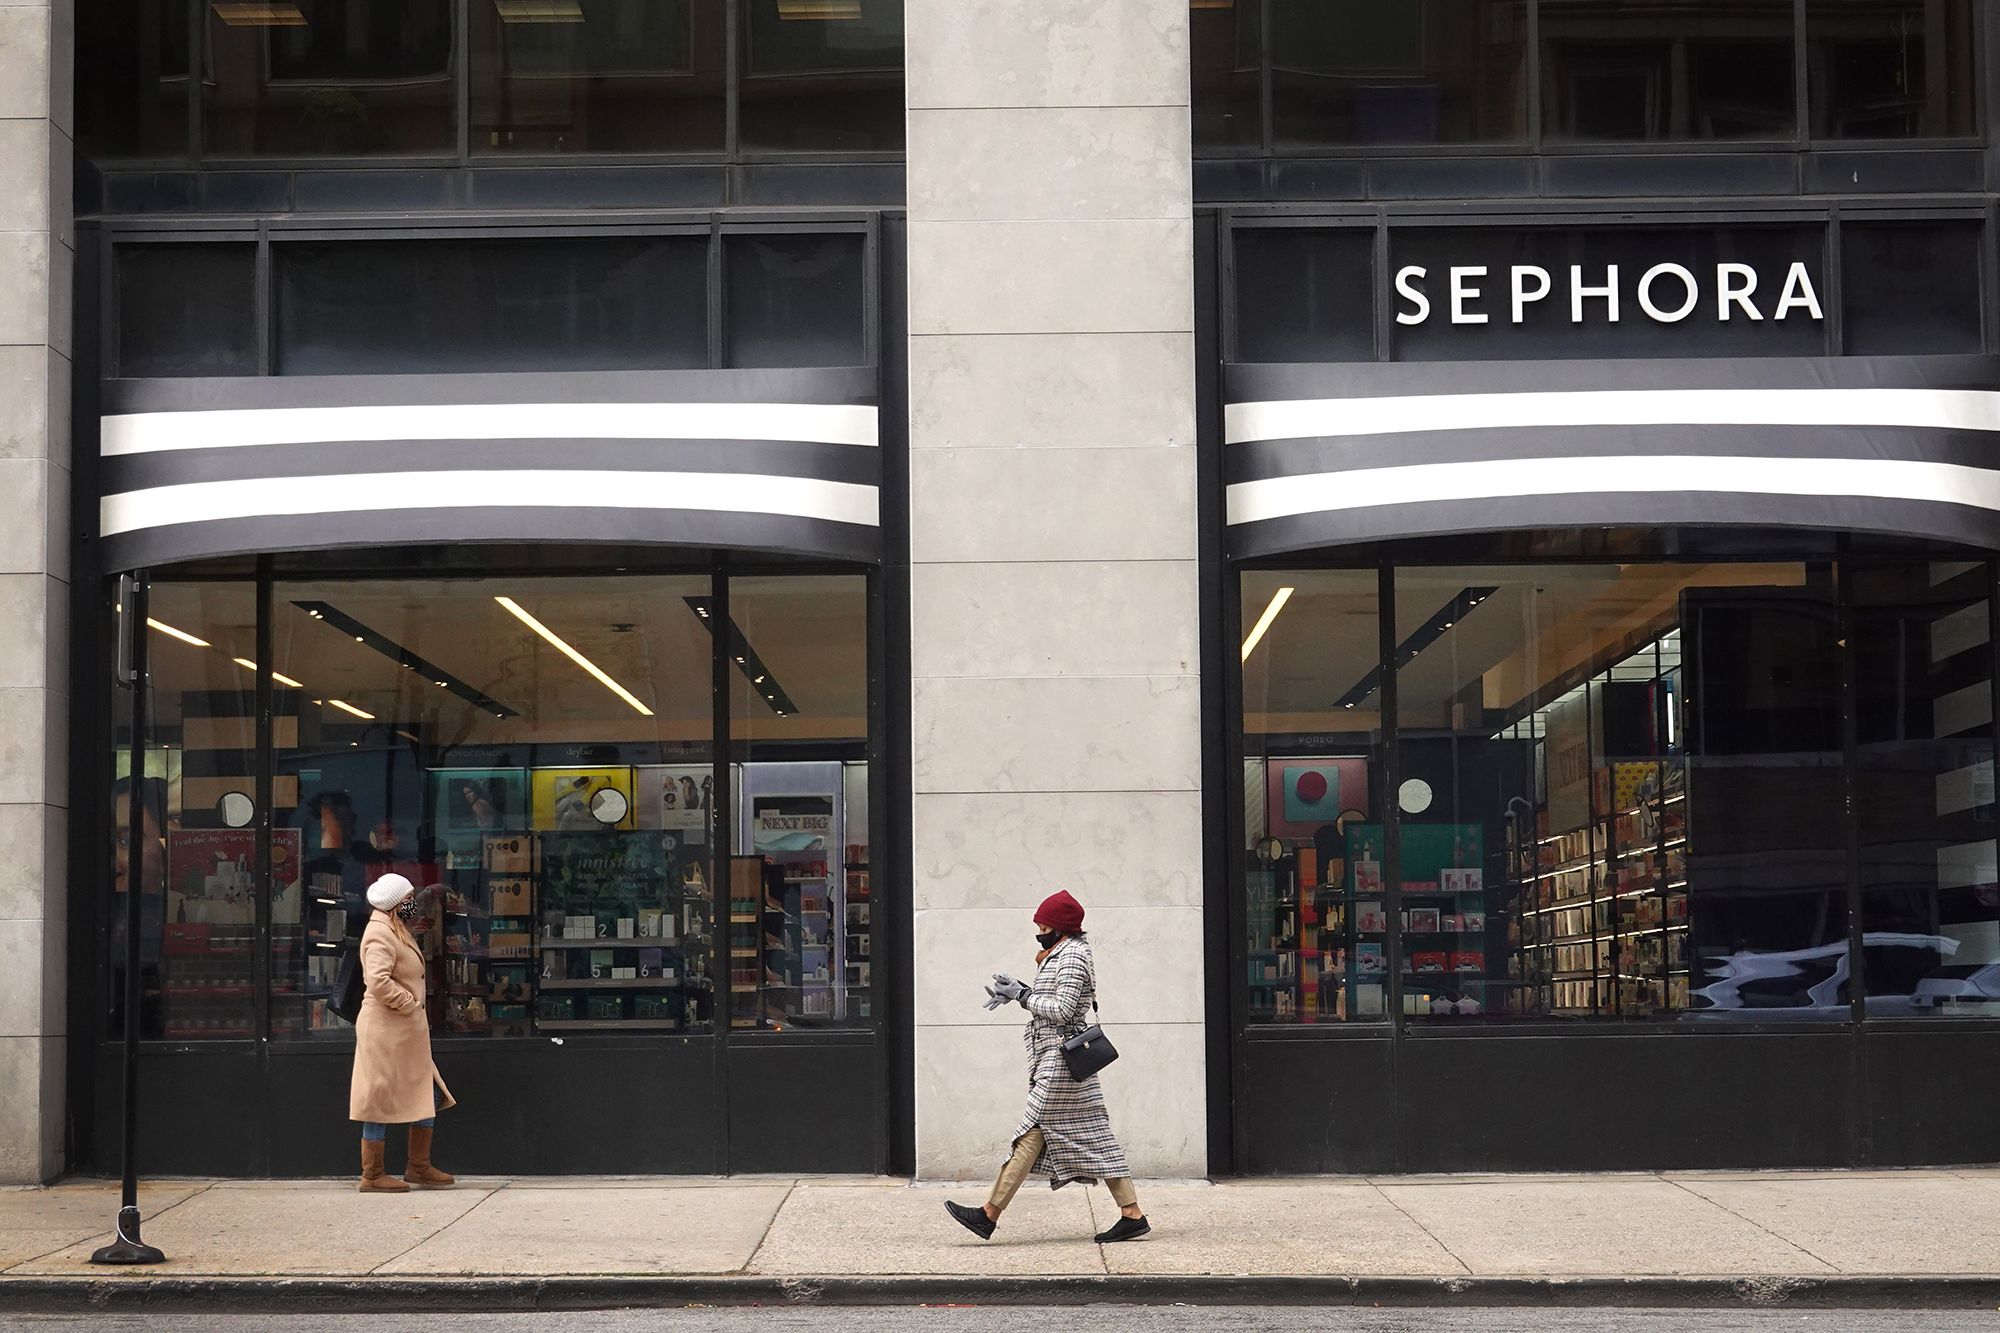 Sephora at Kohl's - Here's Where You Can Shop the New Experience This Year